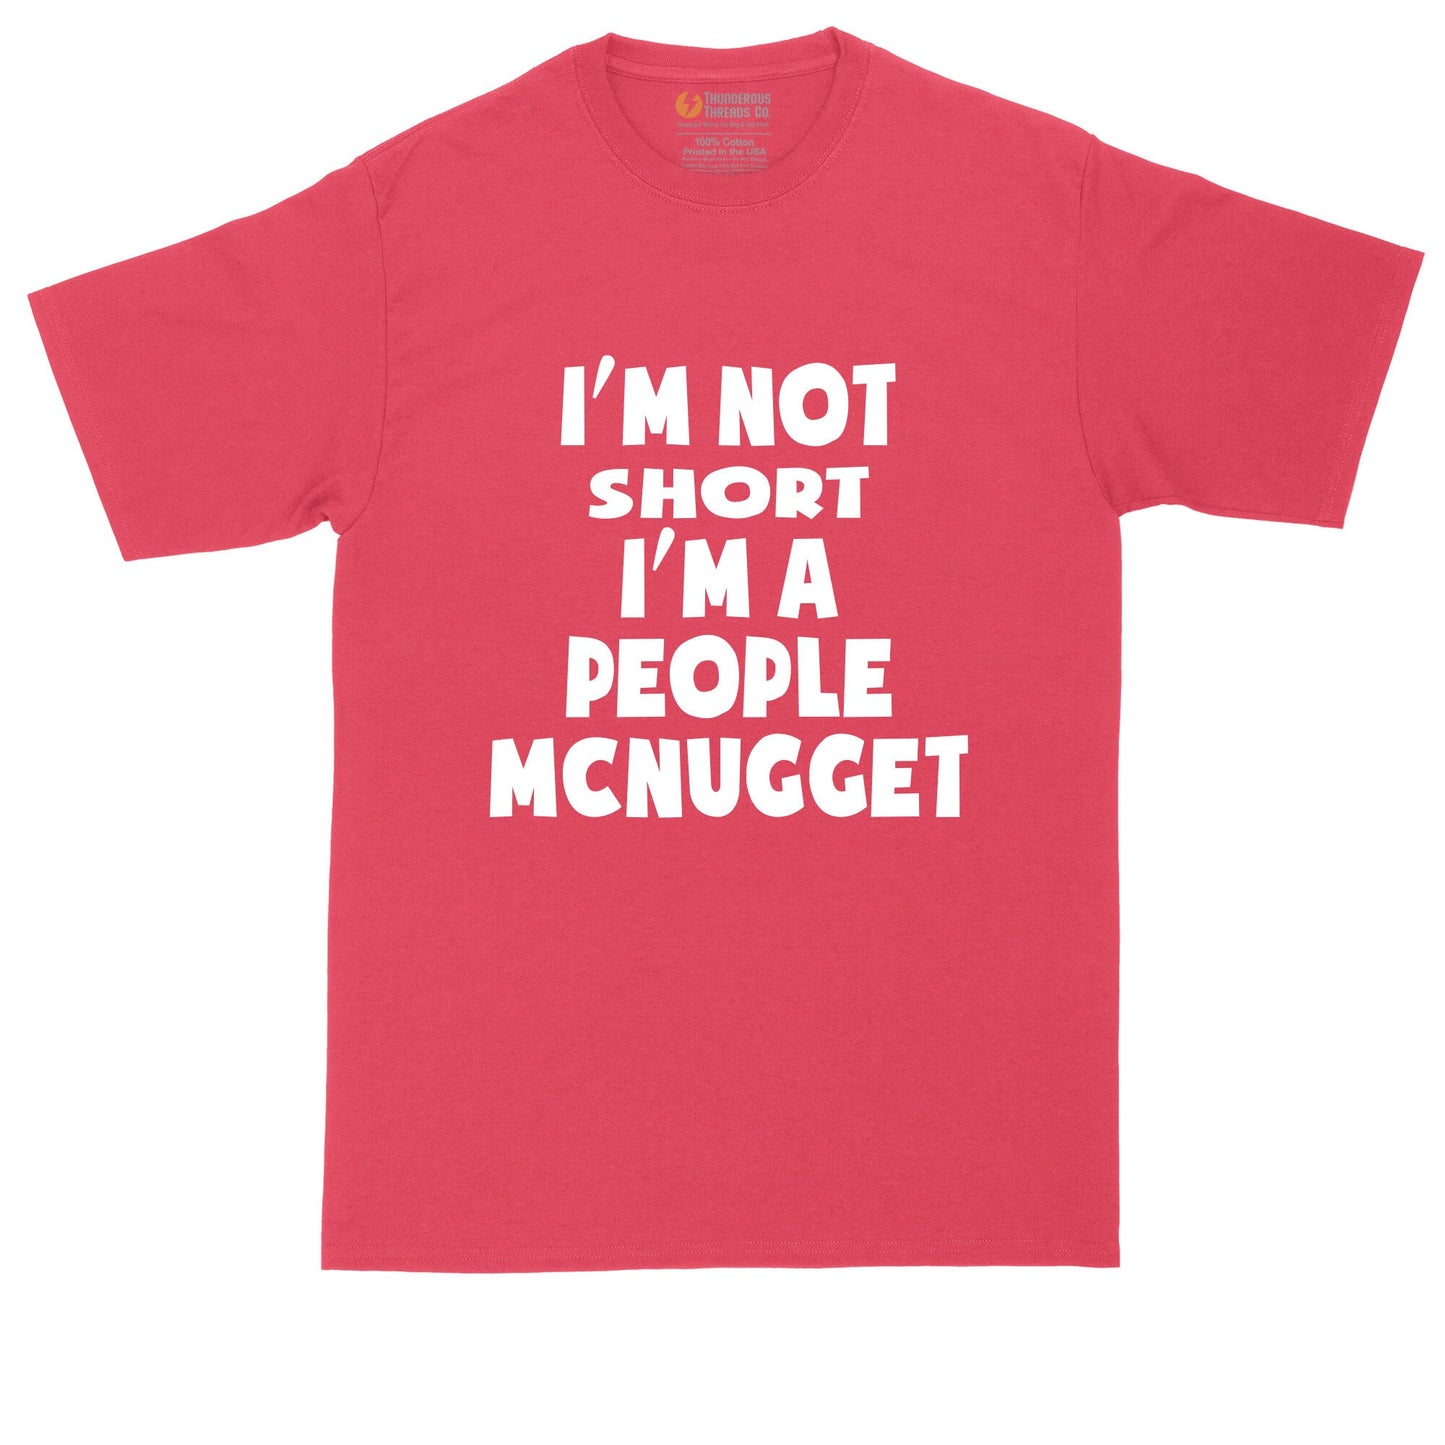 I'm Not Short I'm a People McNugget | Mens Big & Tall Short Sleeve T-Shirt | Thunderous Threads Co